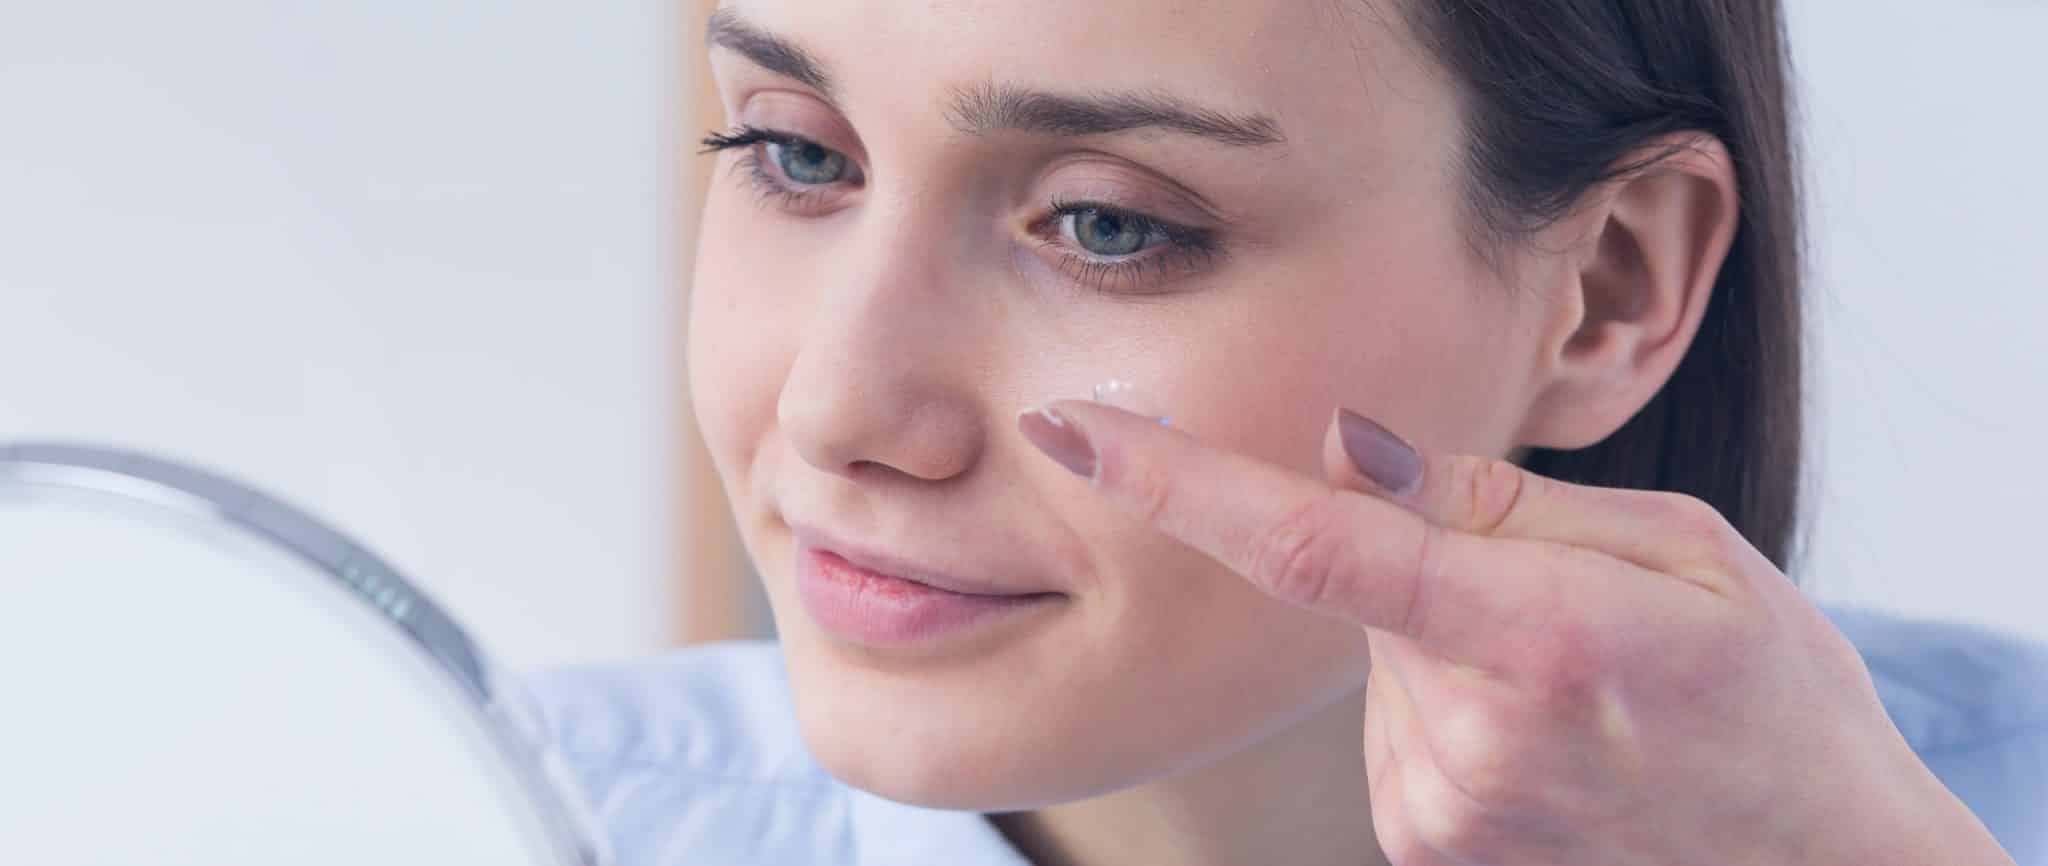 Factors to Consider When Choosing Contact Lenses